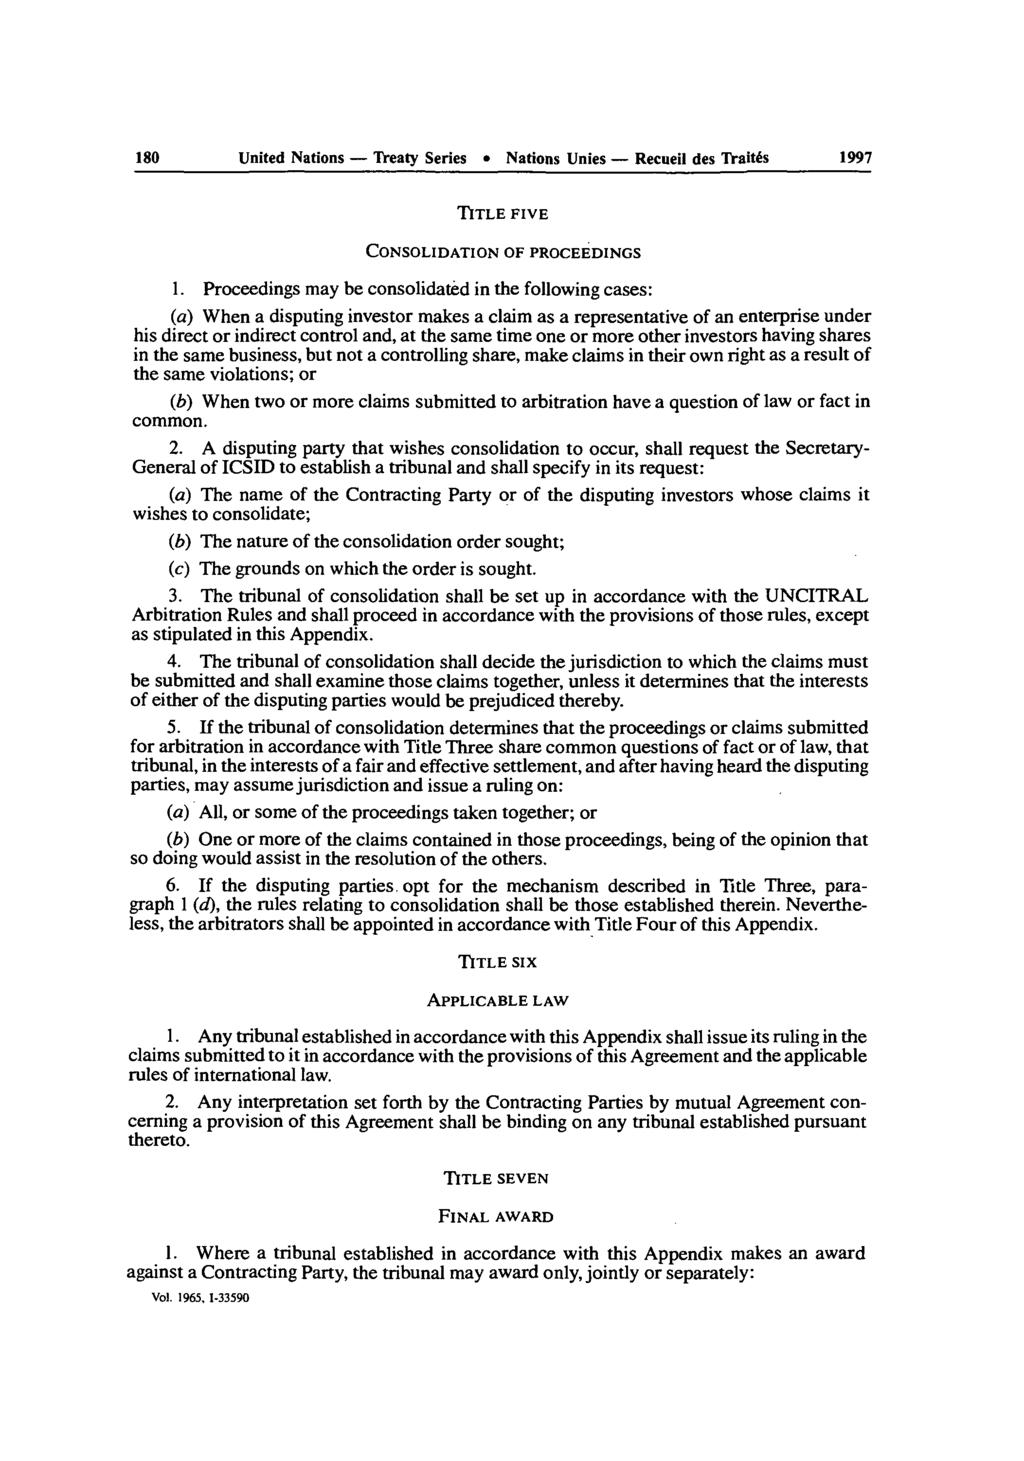 180 United Nations - Treaty Series Nations Unies - Recueil des Traites 1997 TITLE FIVE CONSOLIDATION OF PROCEEDINGS 1.